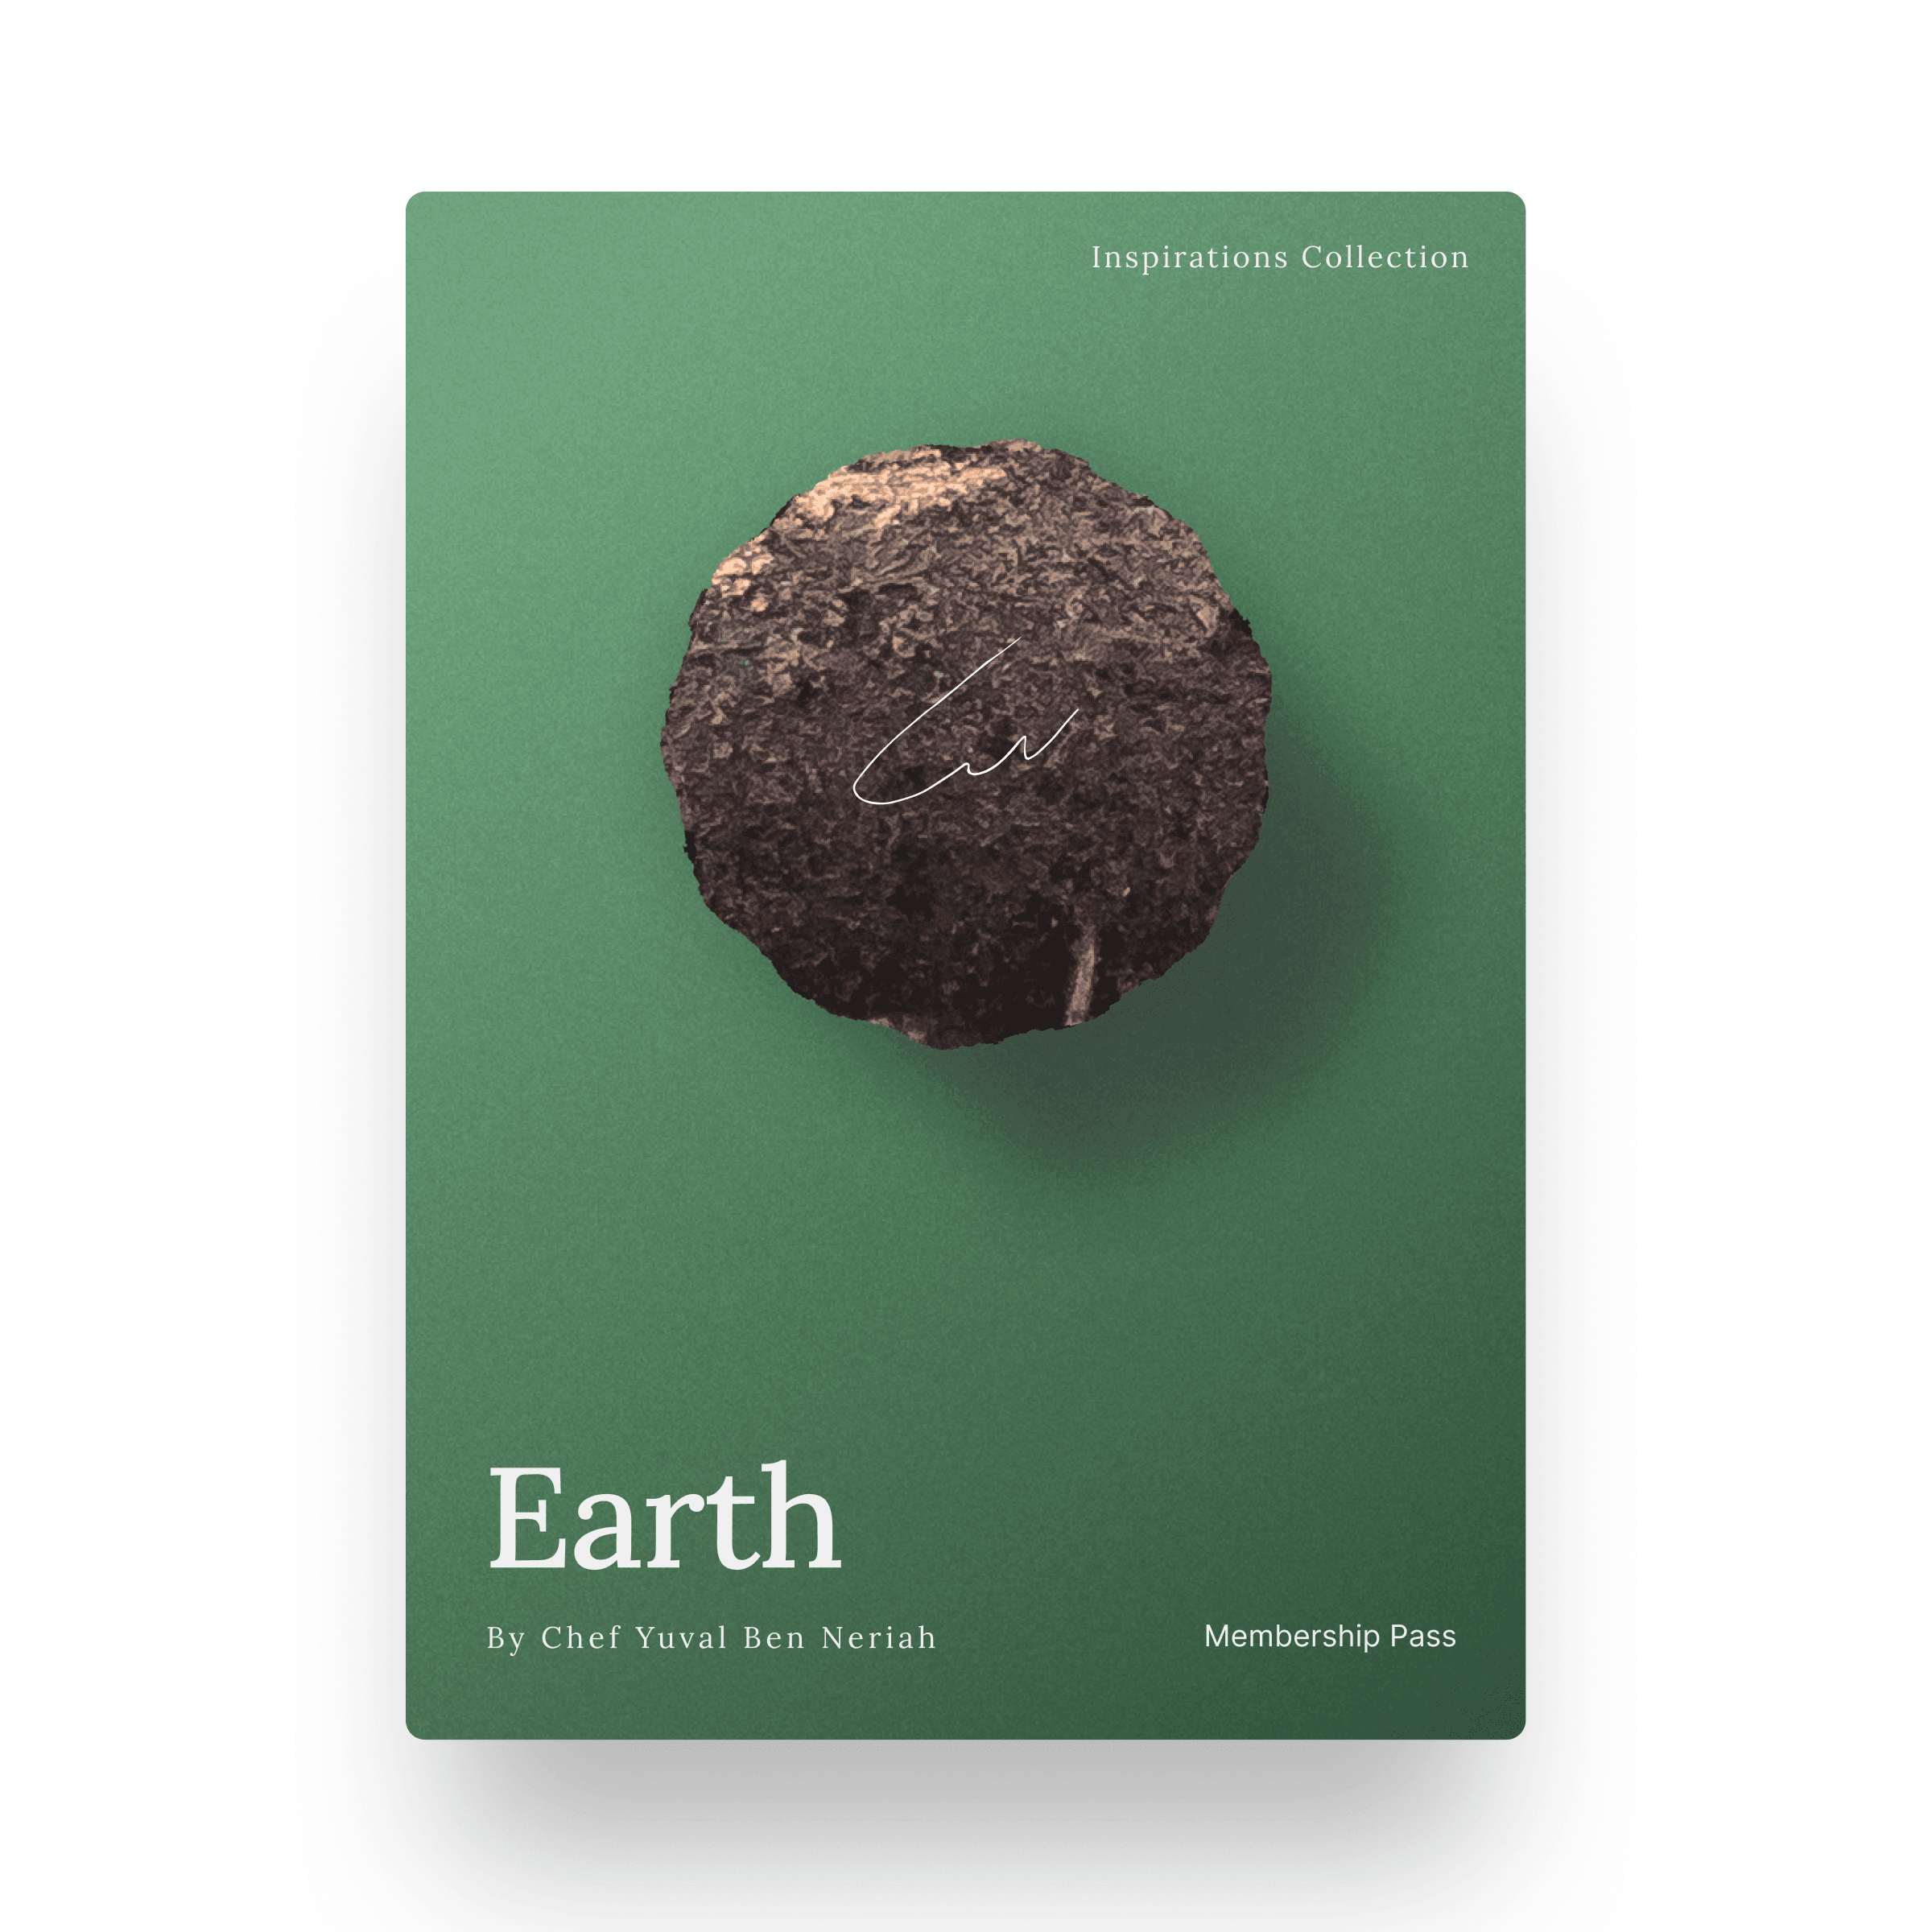 Earth by Chef Yuval Ben Neriah